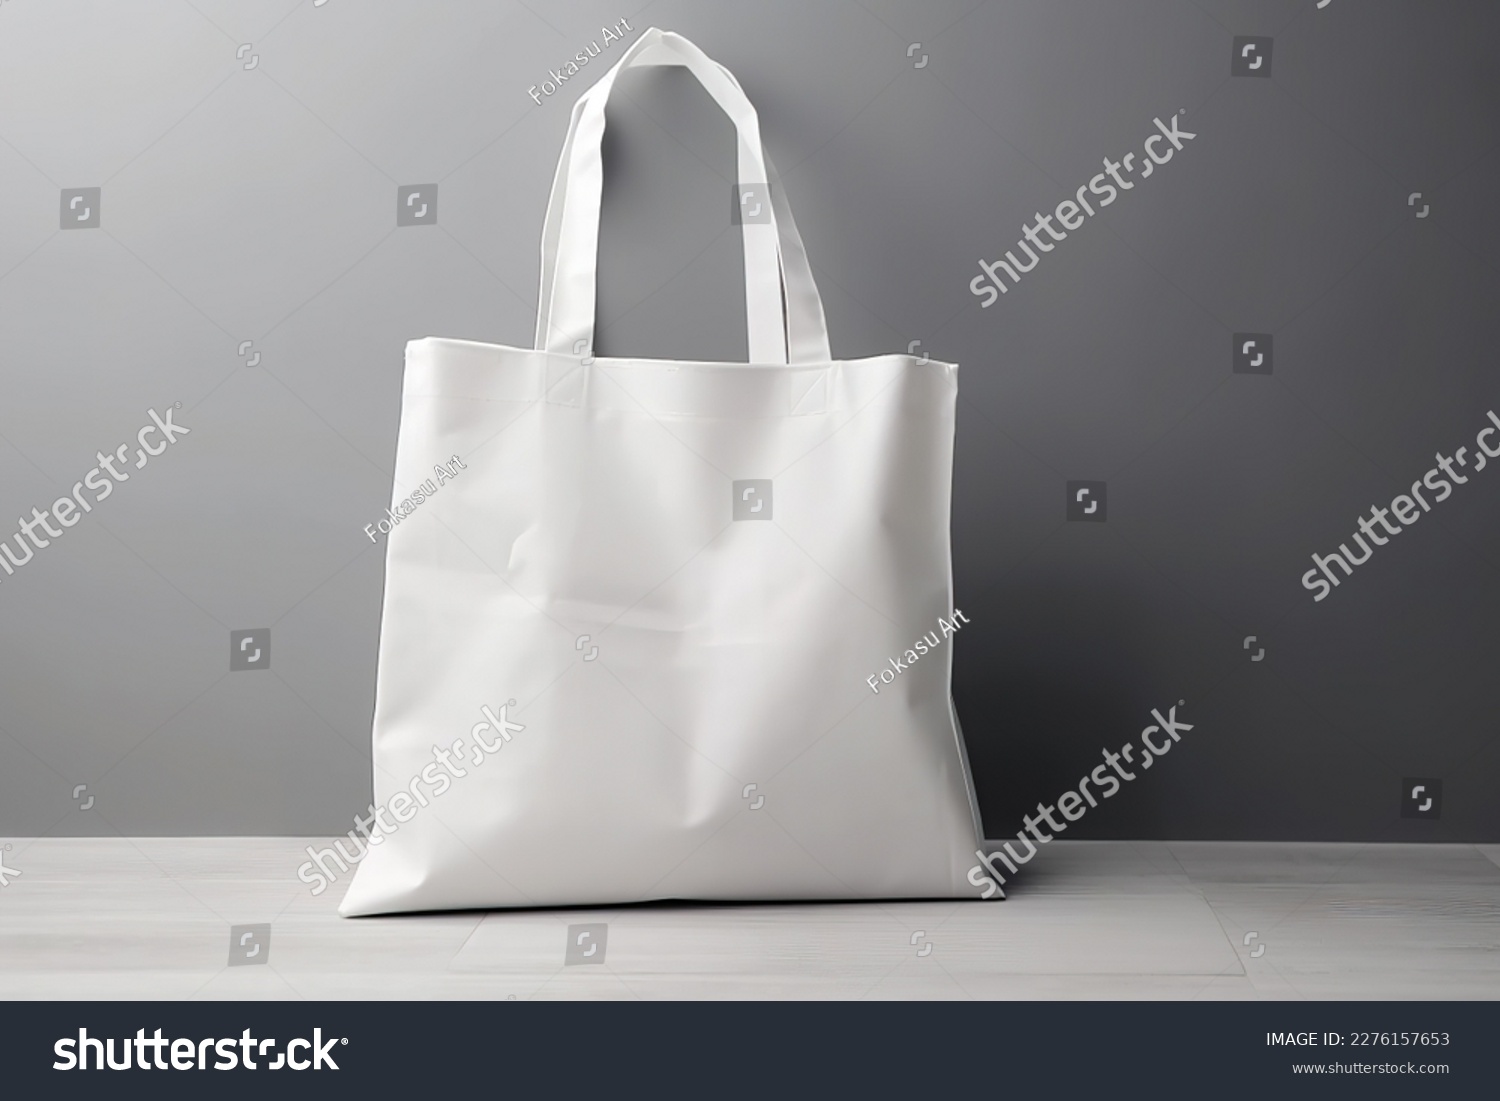 Blank canvas tote bag mockup in white eco friendly design with copy space. Concepts for zero waste movement of shopping bags. #2276157653